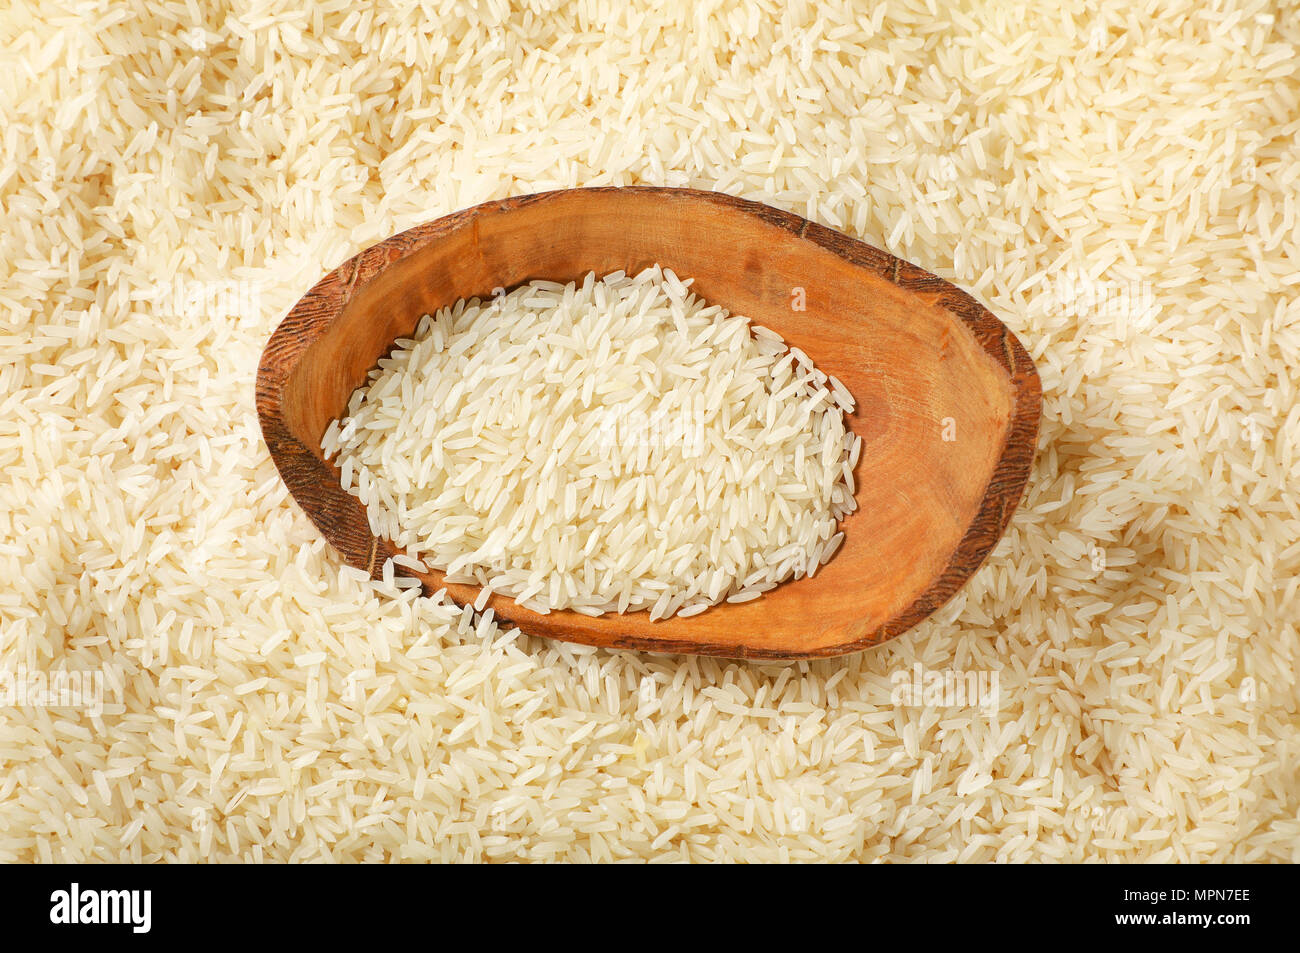 bowl of white long grained rice on rice background Stock Photo